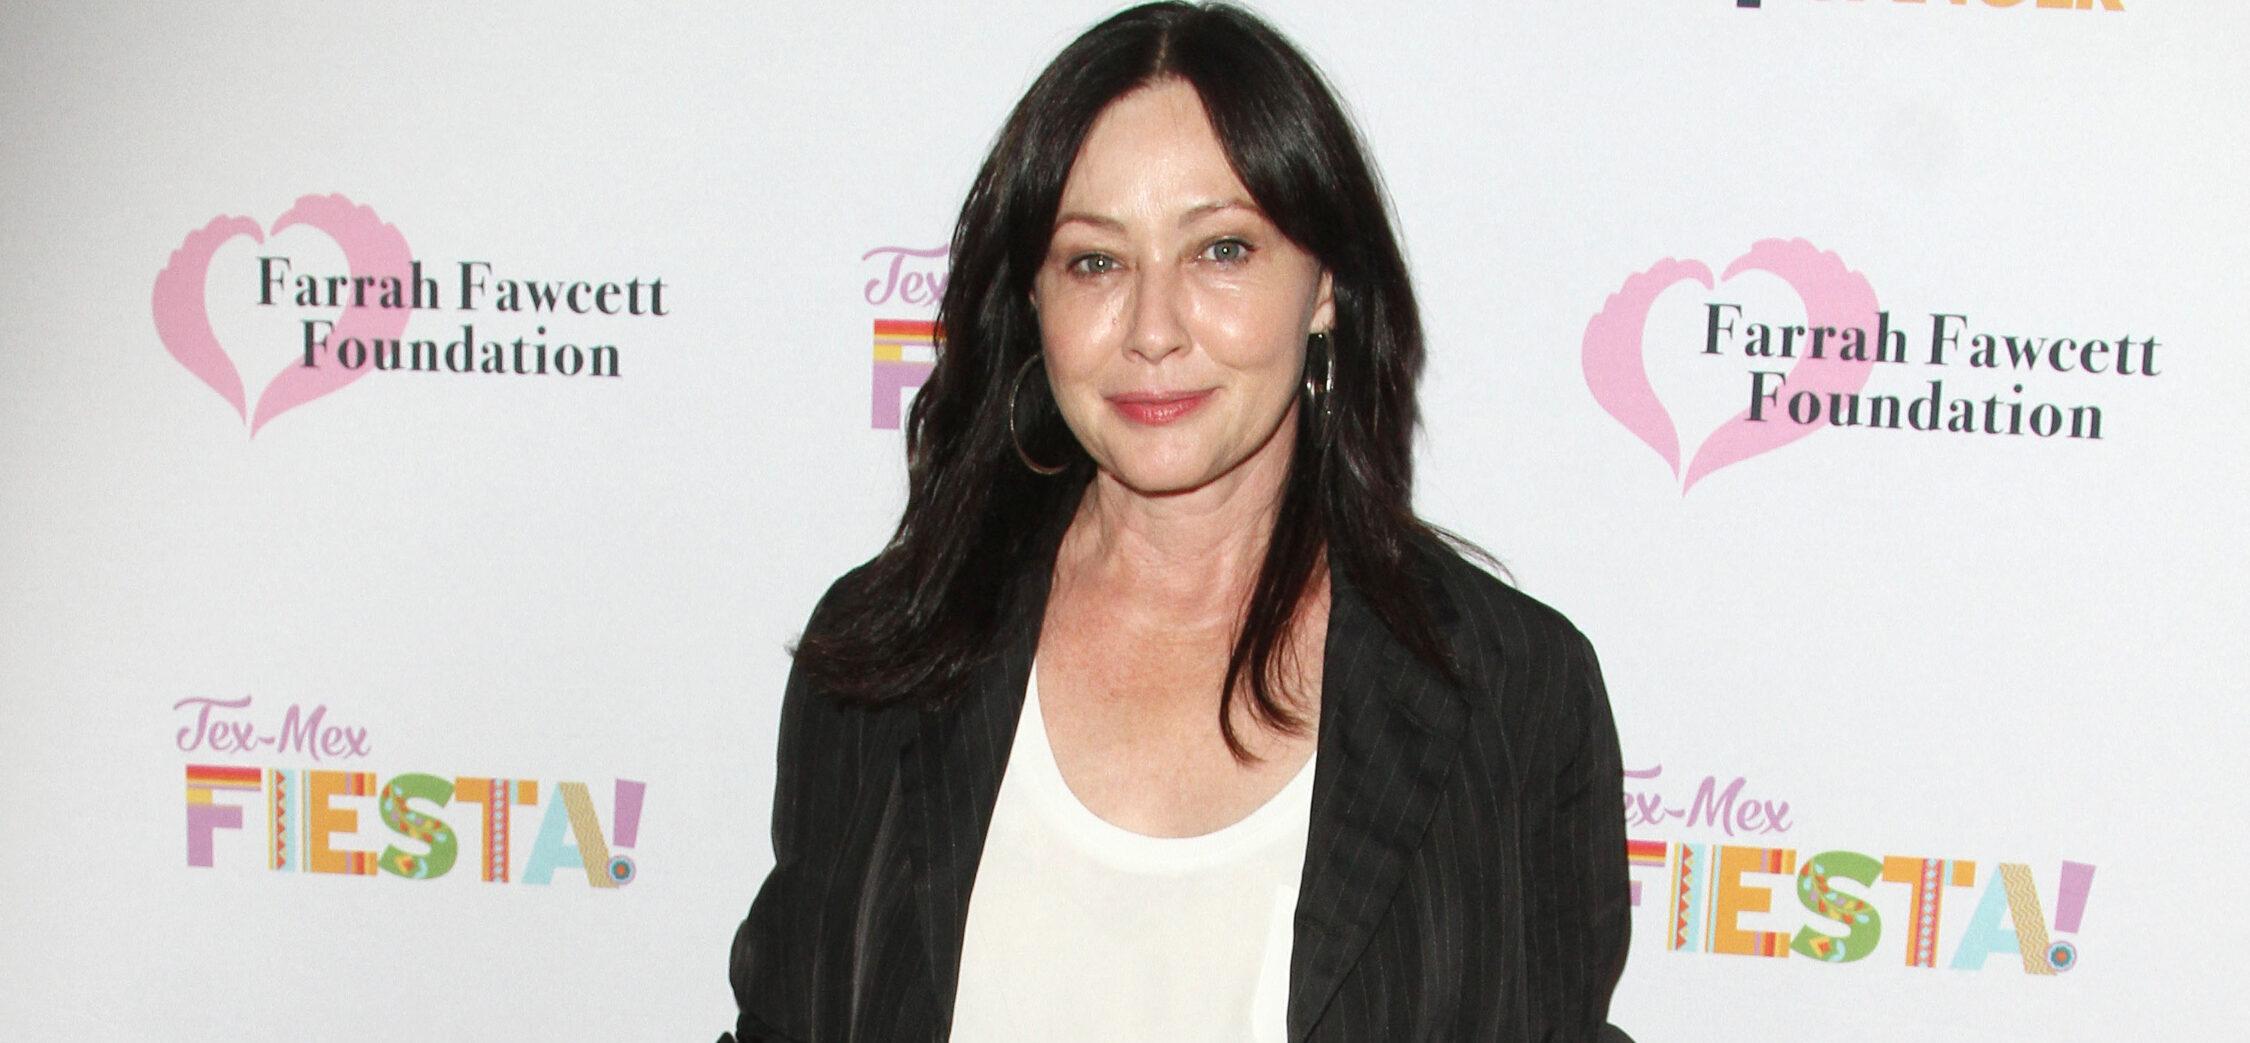 Shannen Doherty Divorce Battle Rages On Amid Fight For Her Life With Brain Cancer